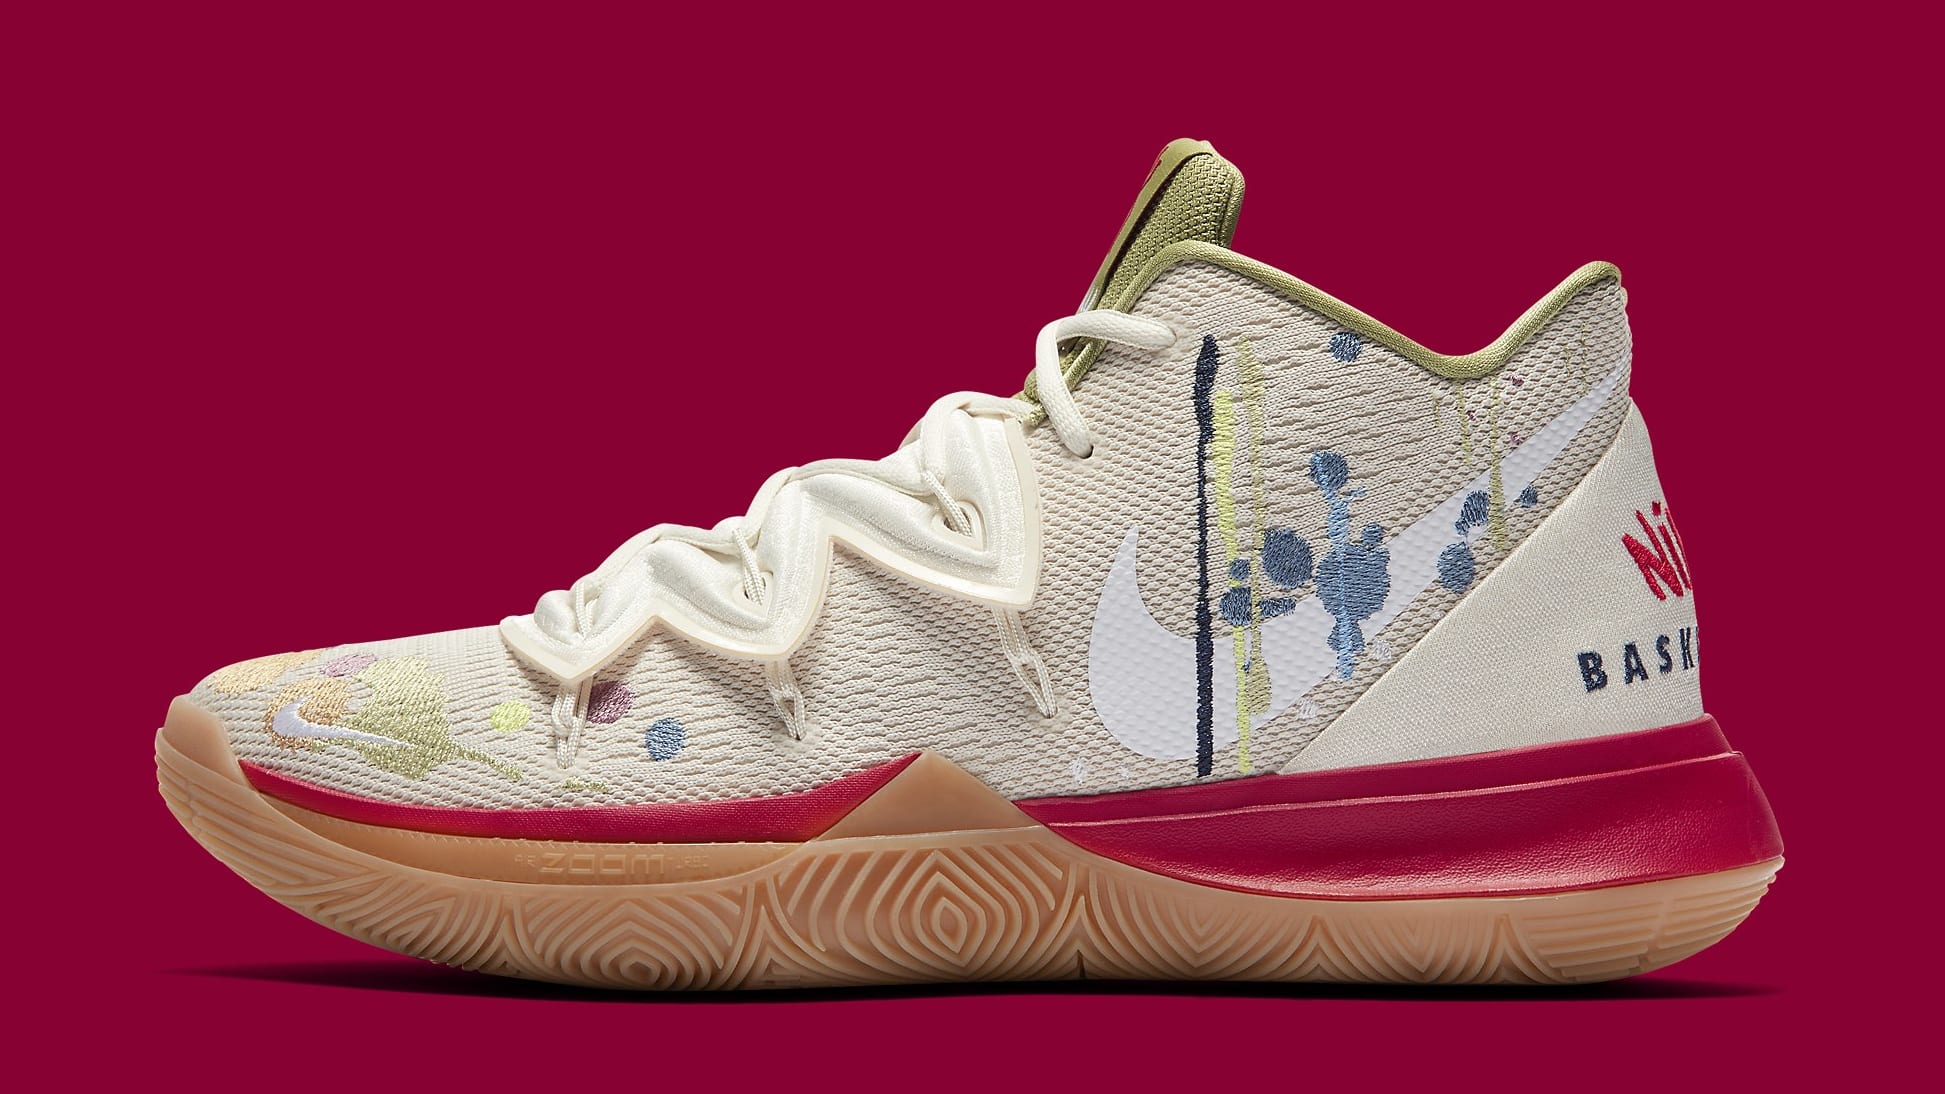 Bandulu x Nike Kyrie 5 Drops This Weekend: Official Details | HipHop Magz